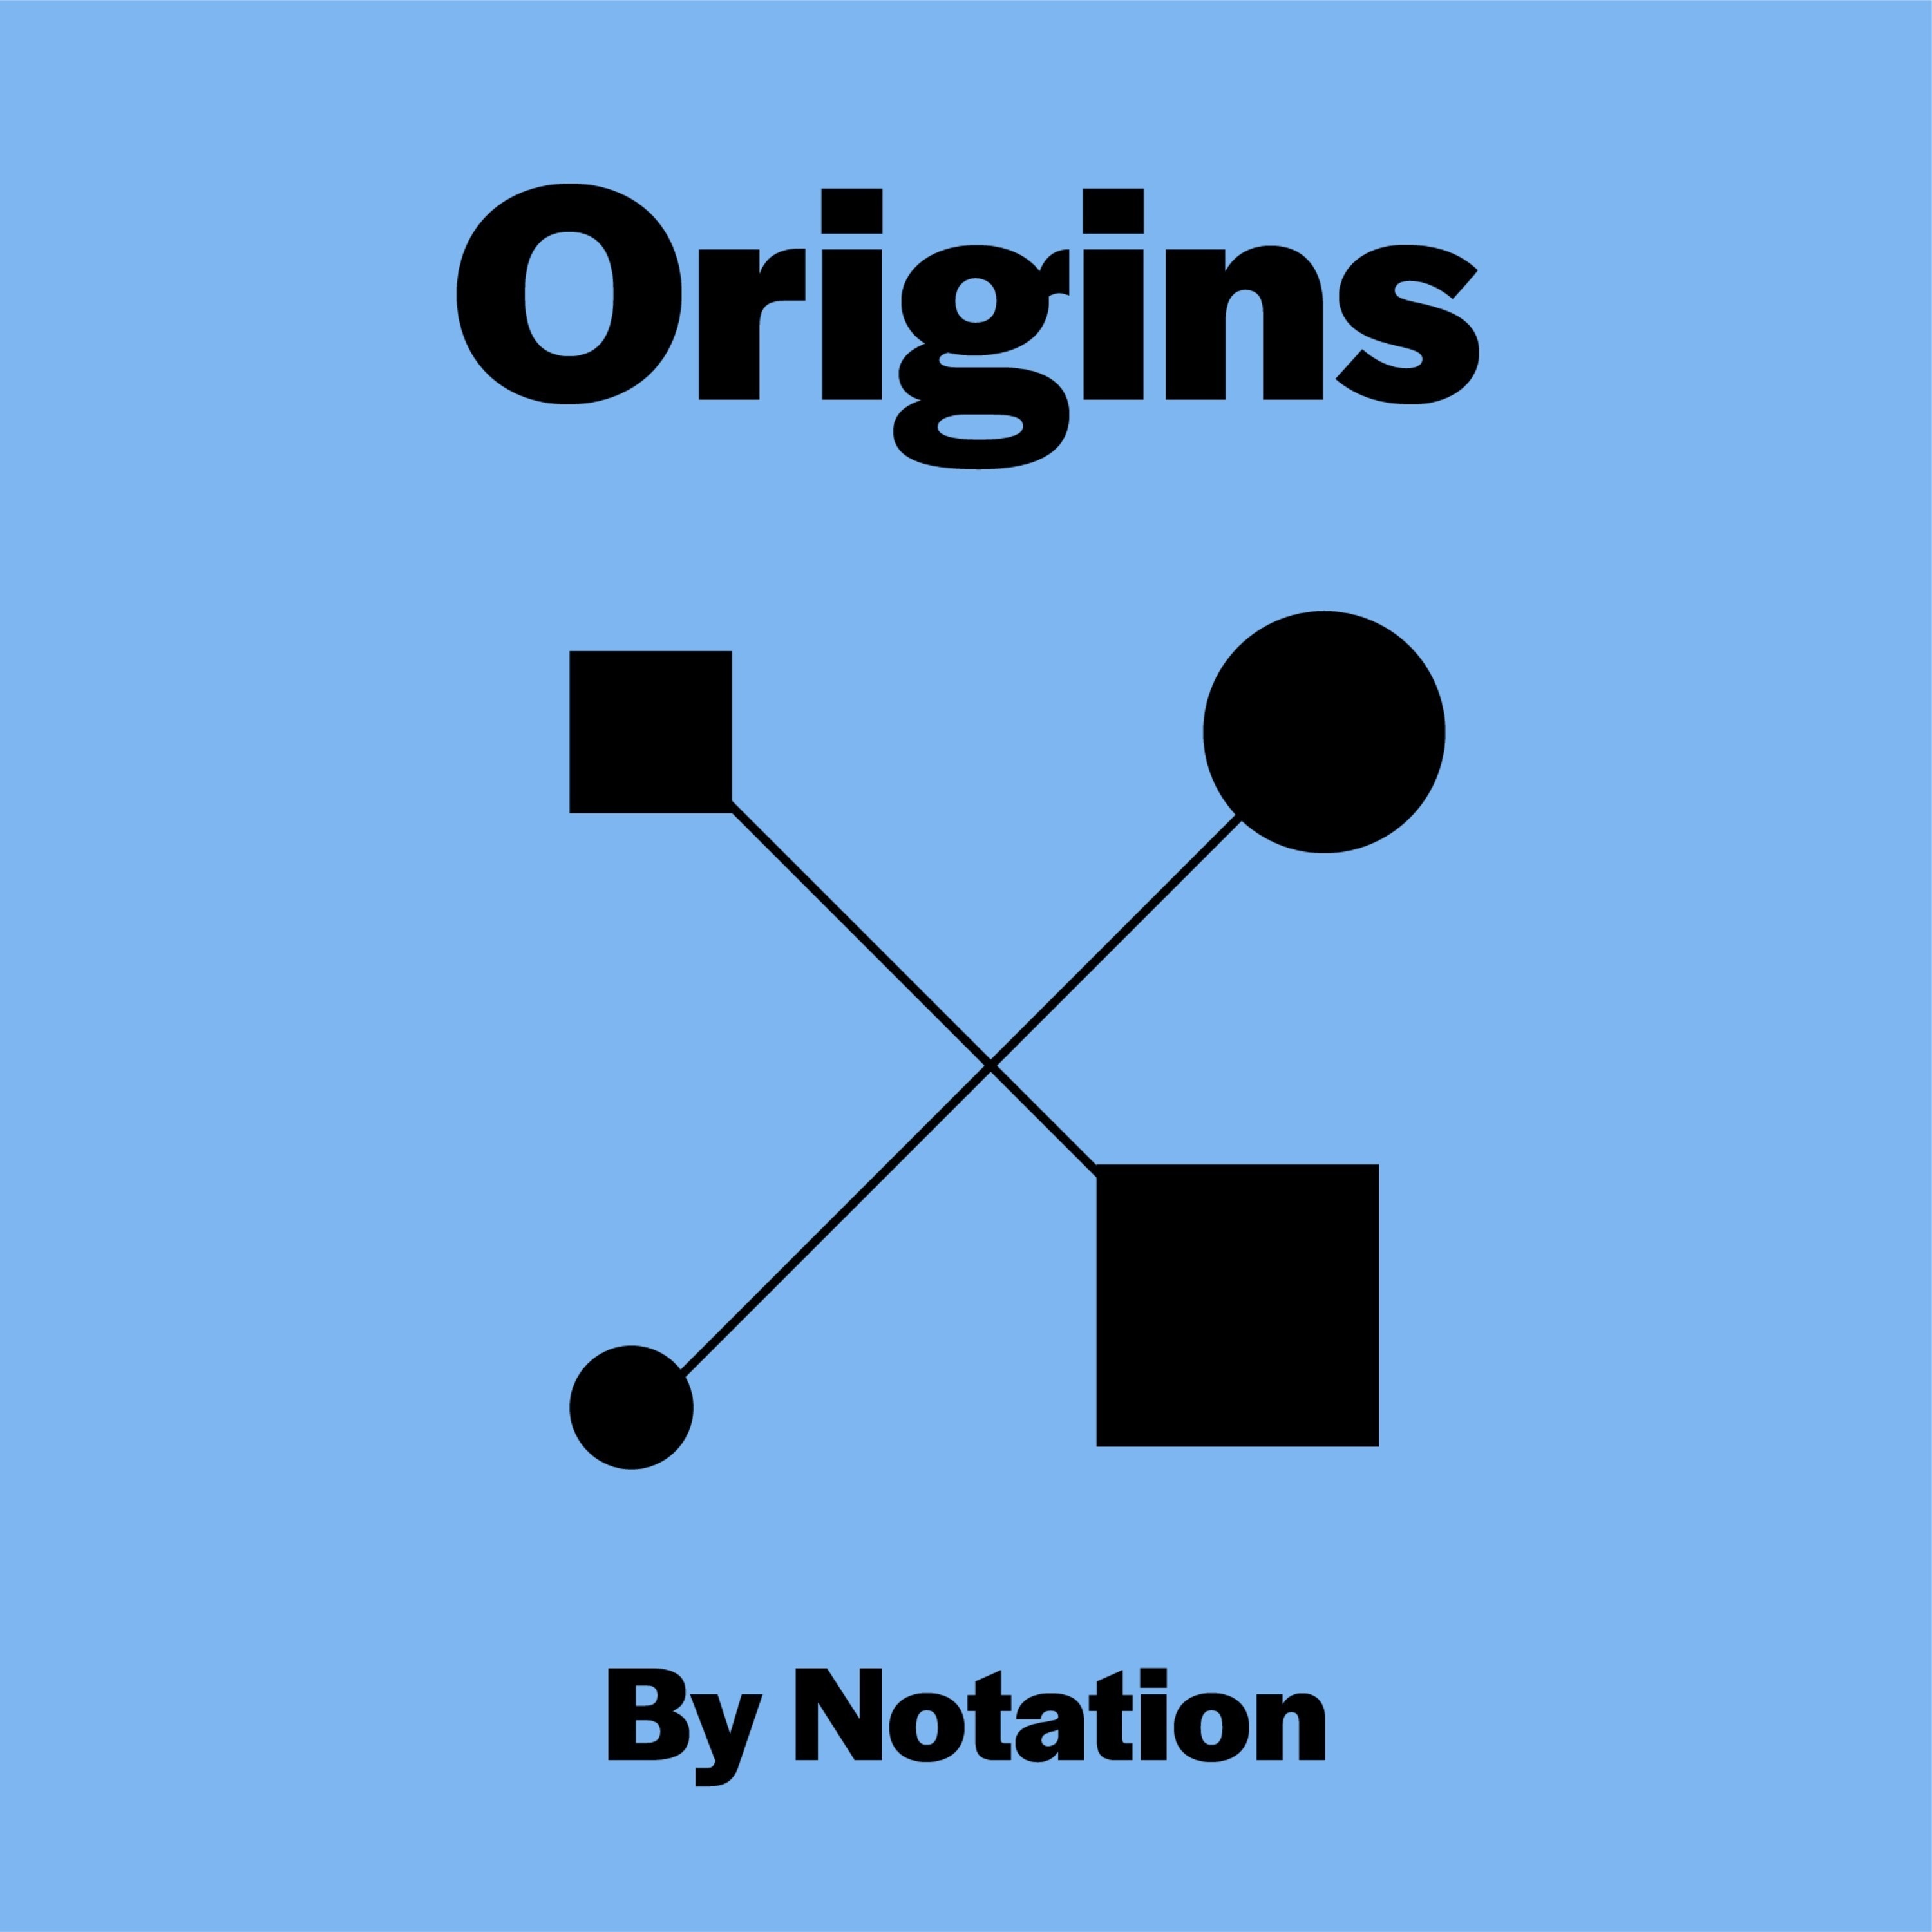 Origins - A podcast about Limited Partners, created by Notation Capital